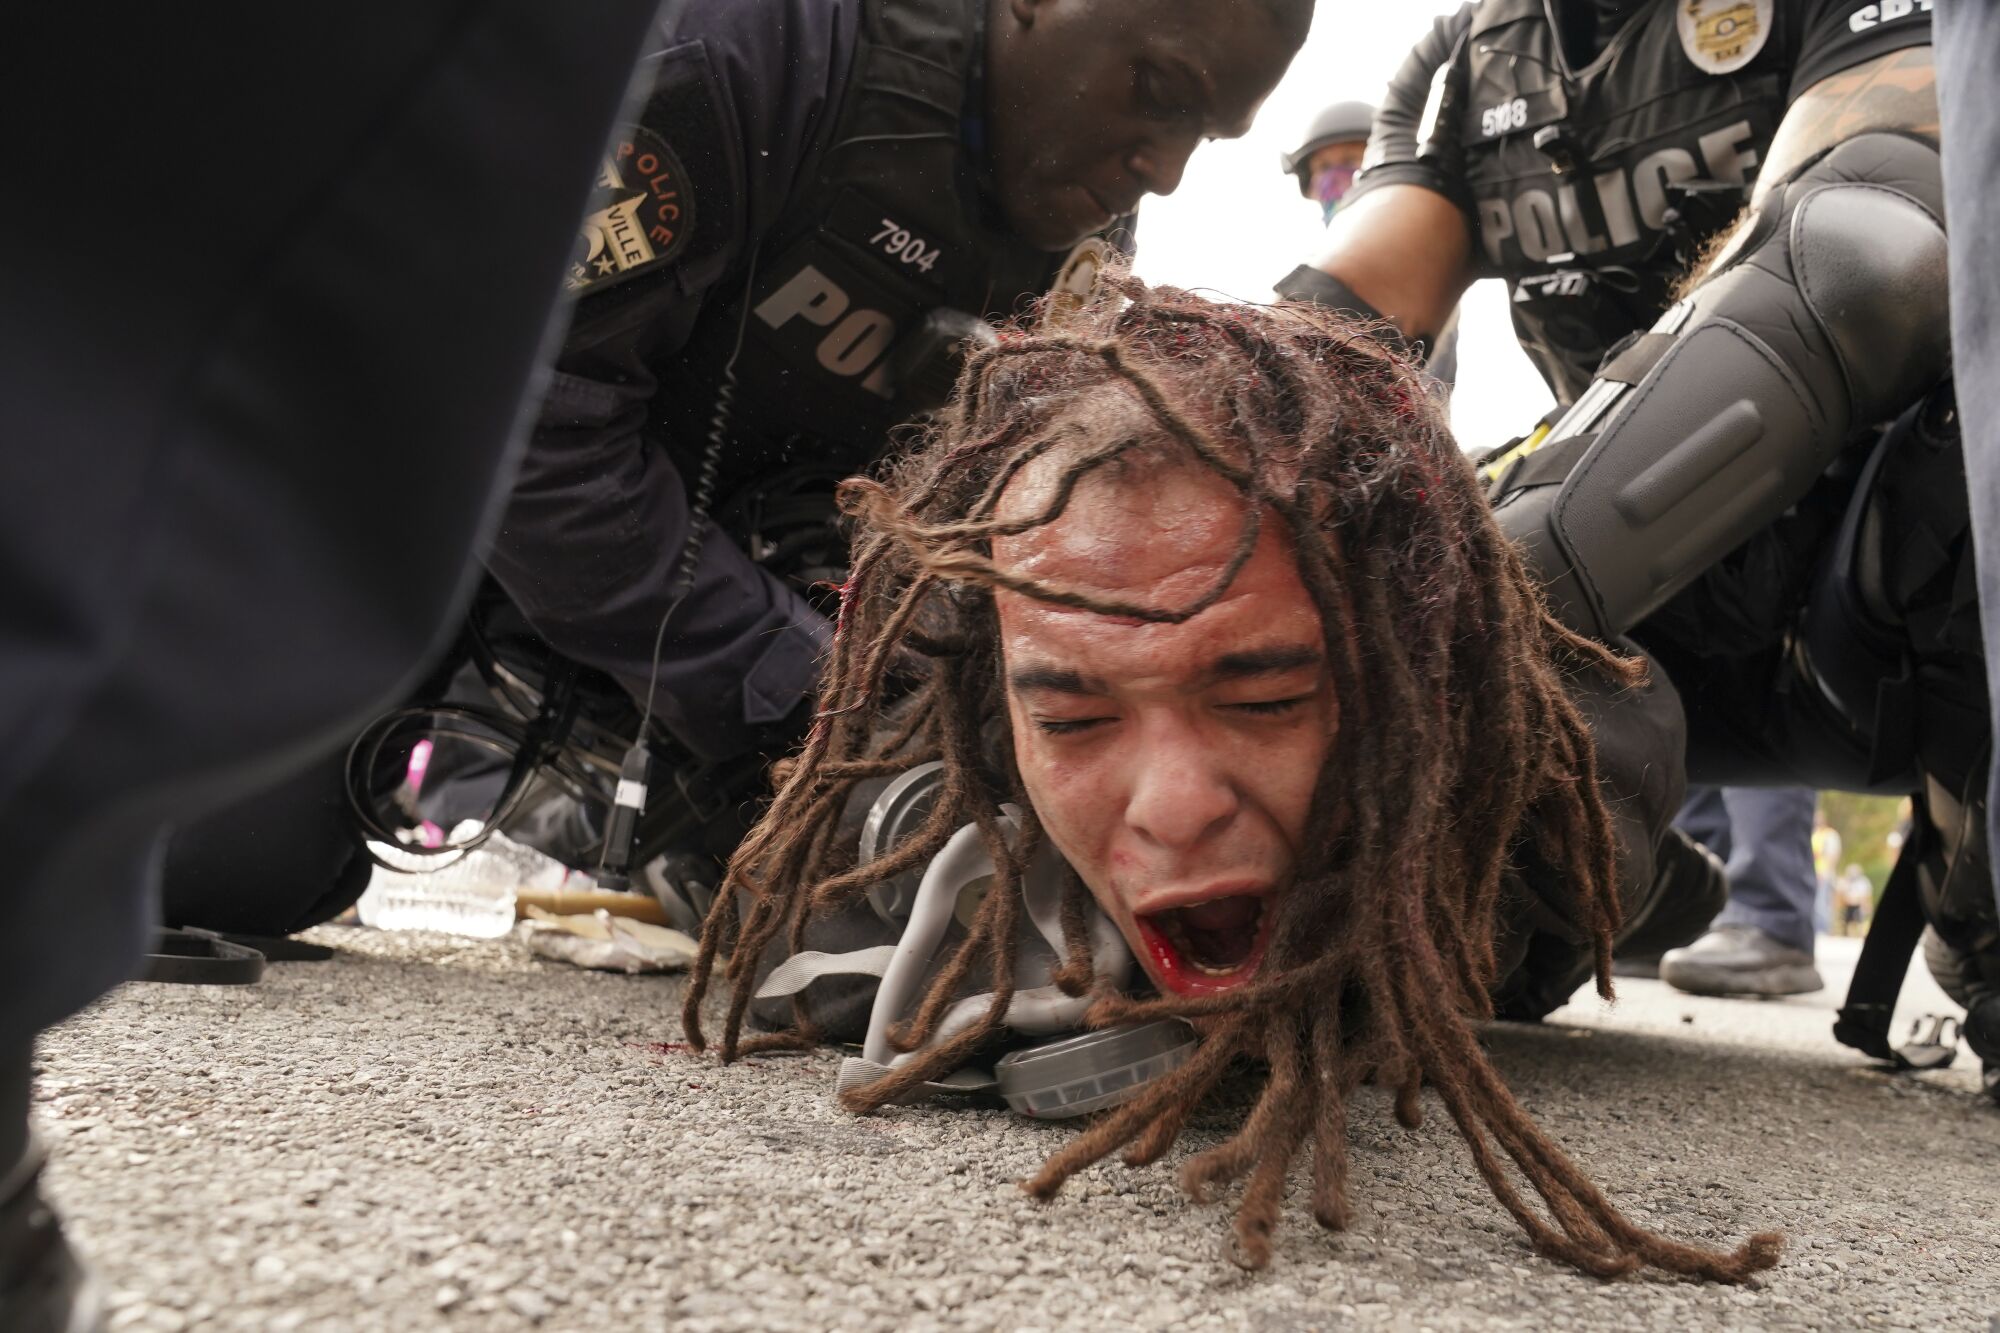 Louisville police detain a man after a group marched in Louisville, Ky.